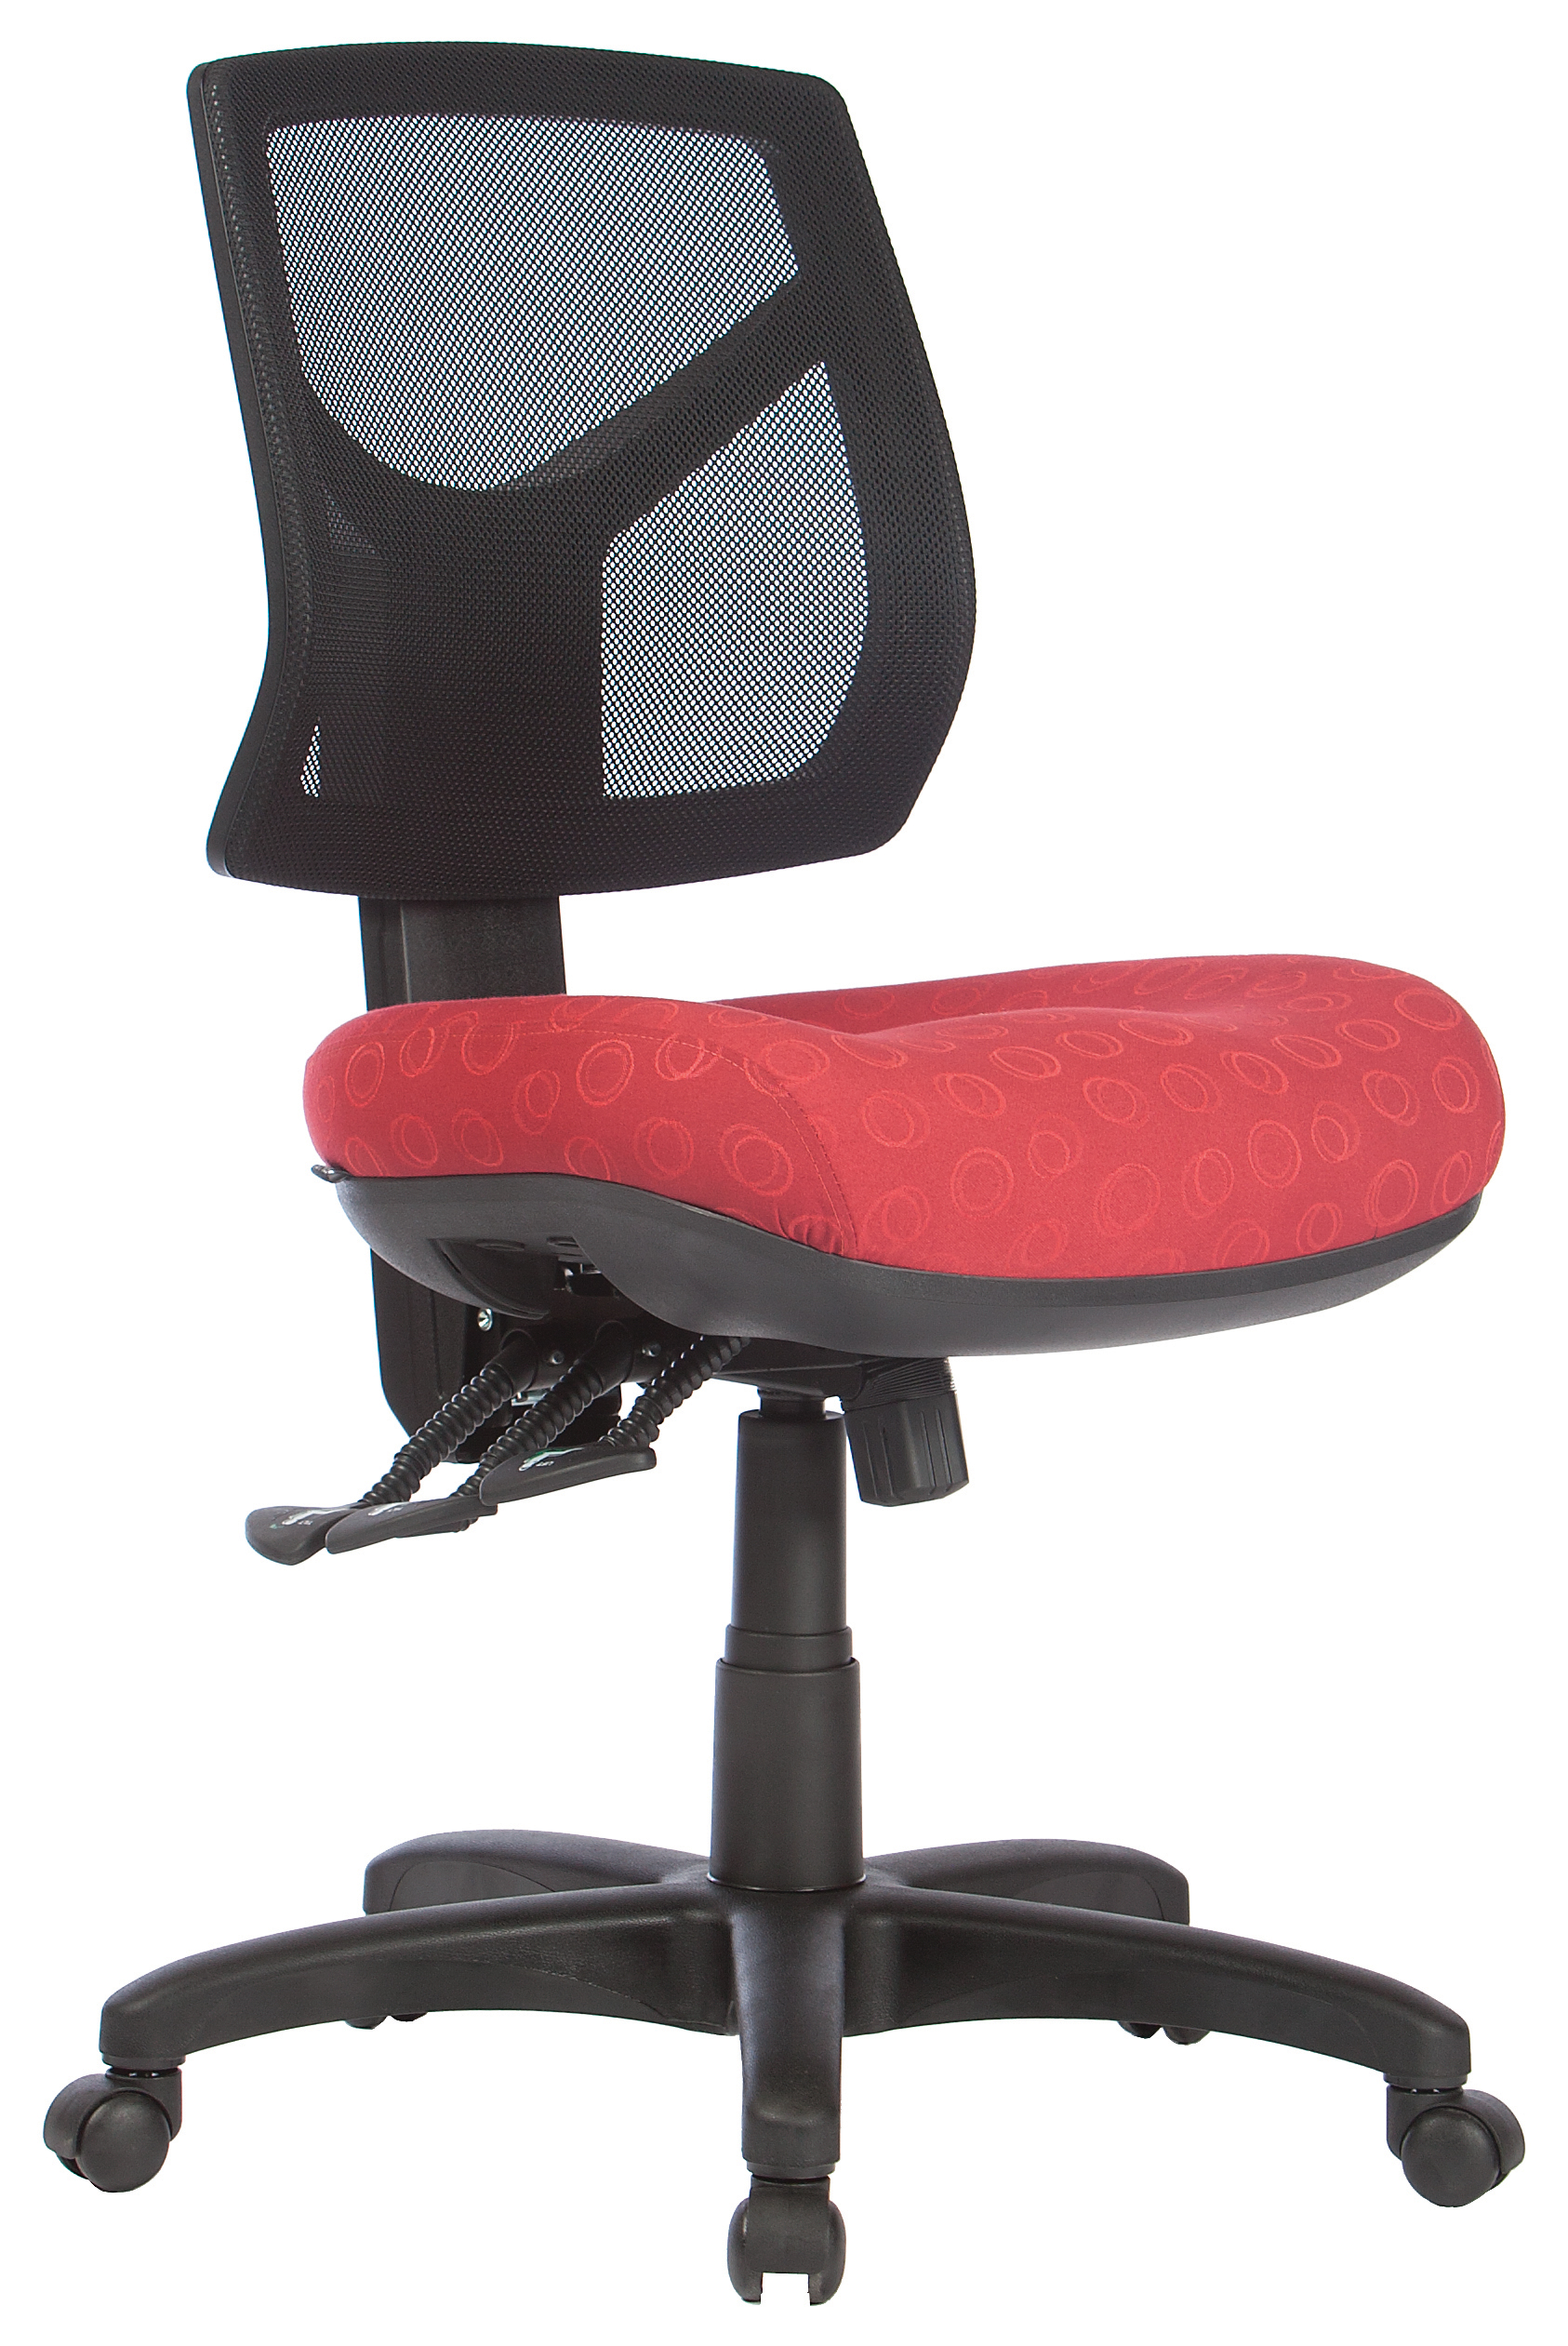 Chelsea 3 Lever Low Mesh Back Big Boy Seat Task Chair